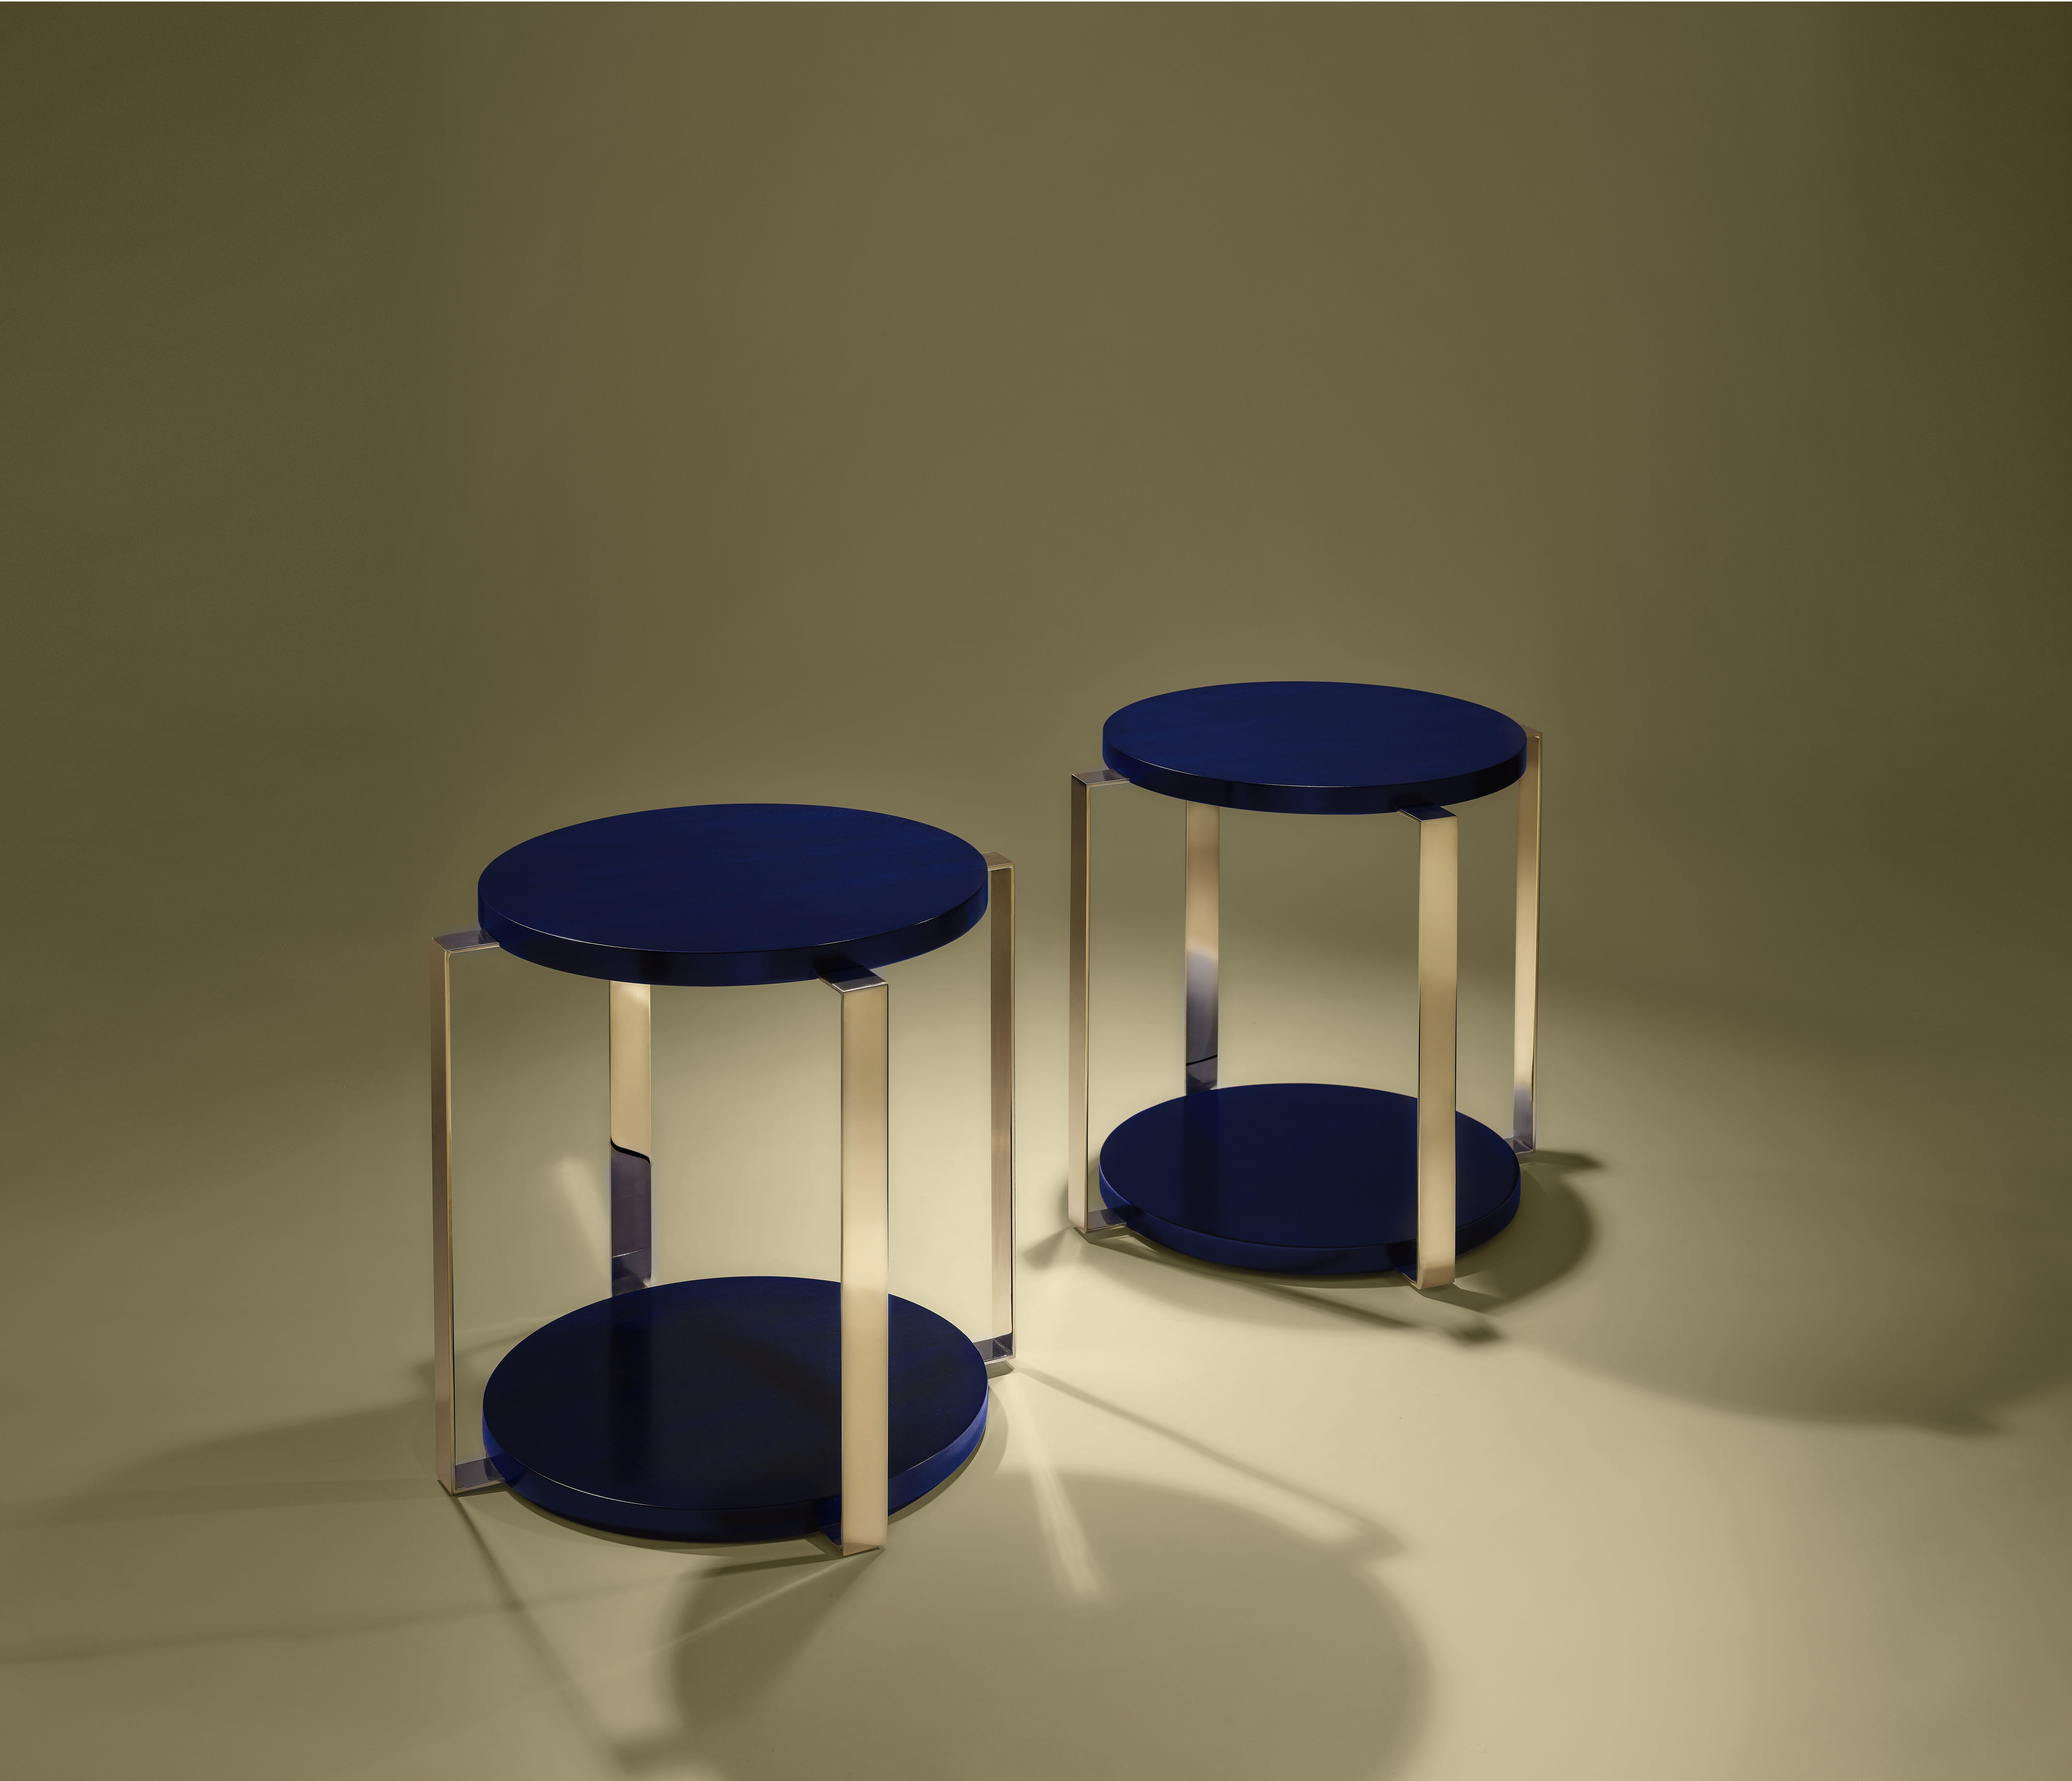 Dorchester contemporary side table in gold metal and navy ironwood

Bespoke / Customizable
Identical shapes with different sizes and finishings.
All RAL colors available. (Mate / Half Gloss / Gloss).